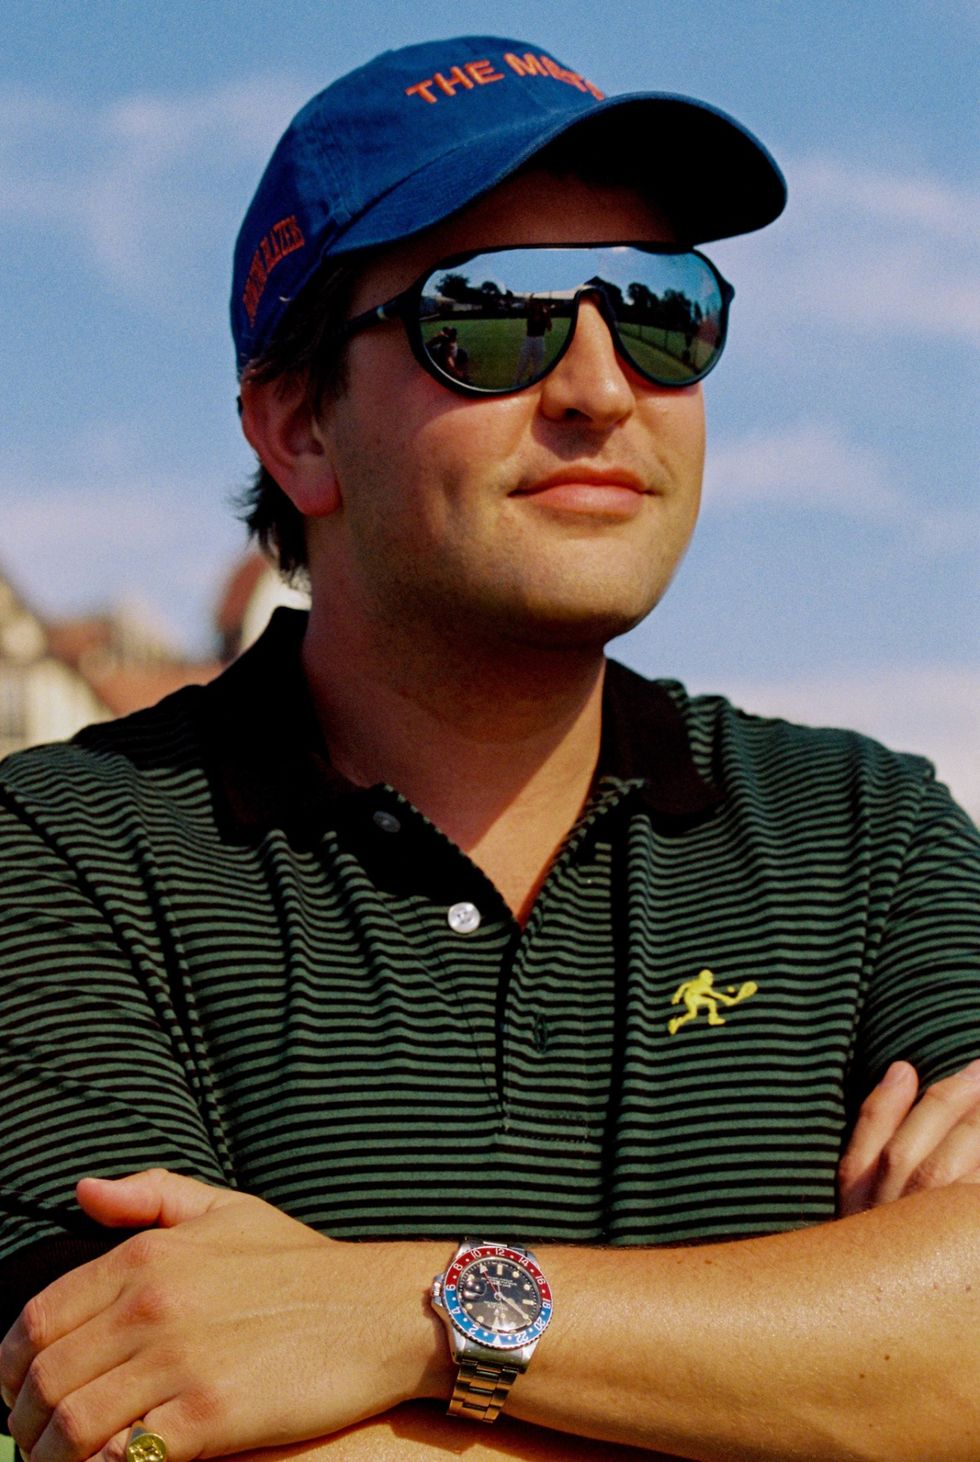 a man wearing sunglasses and a hat